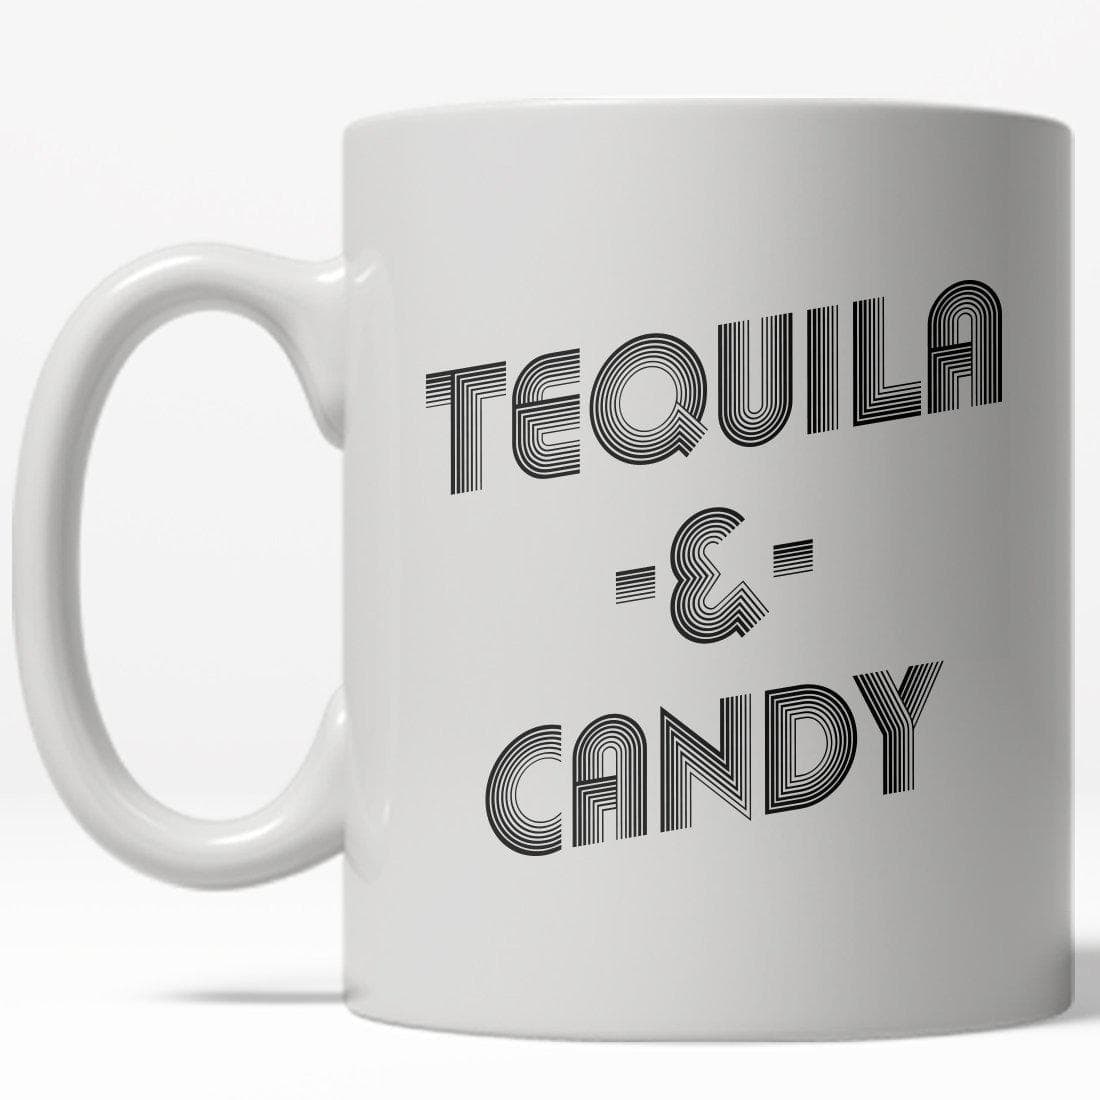 Tequila And Candy Mug - Crazy Dog T-Shirts